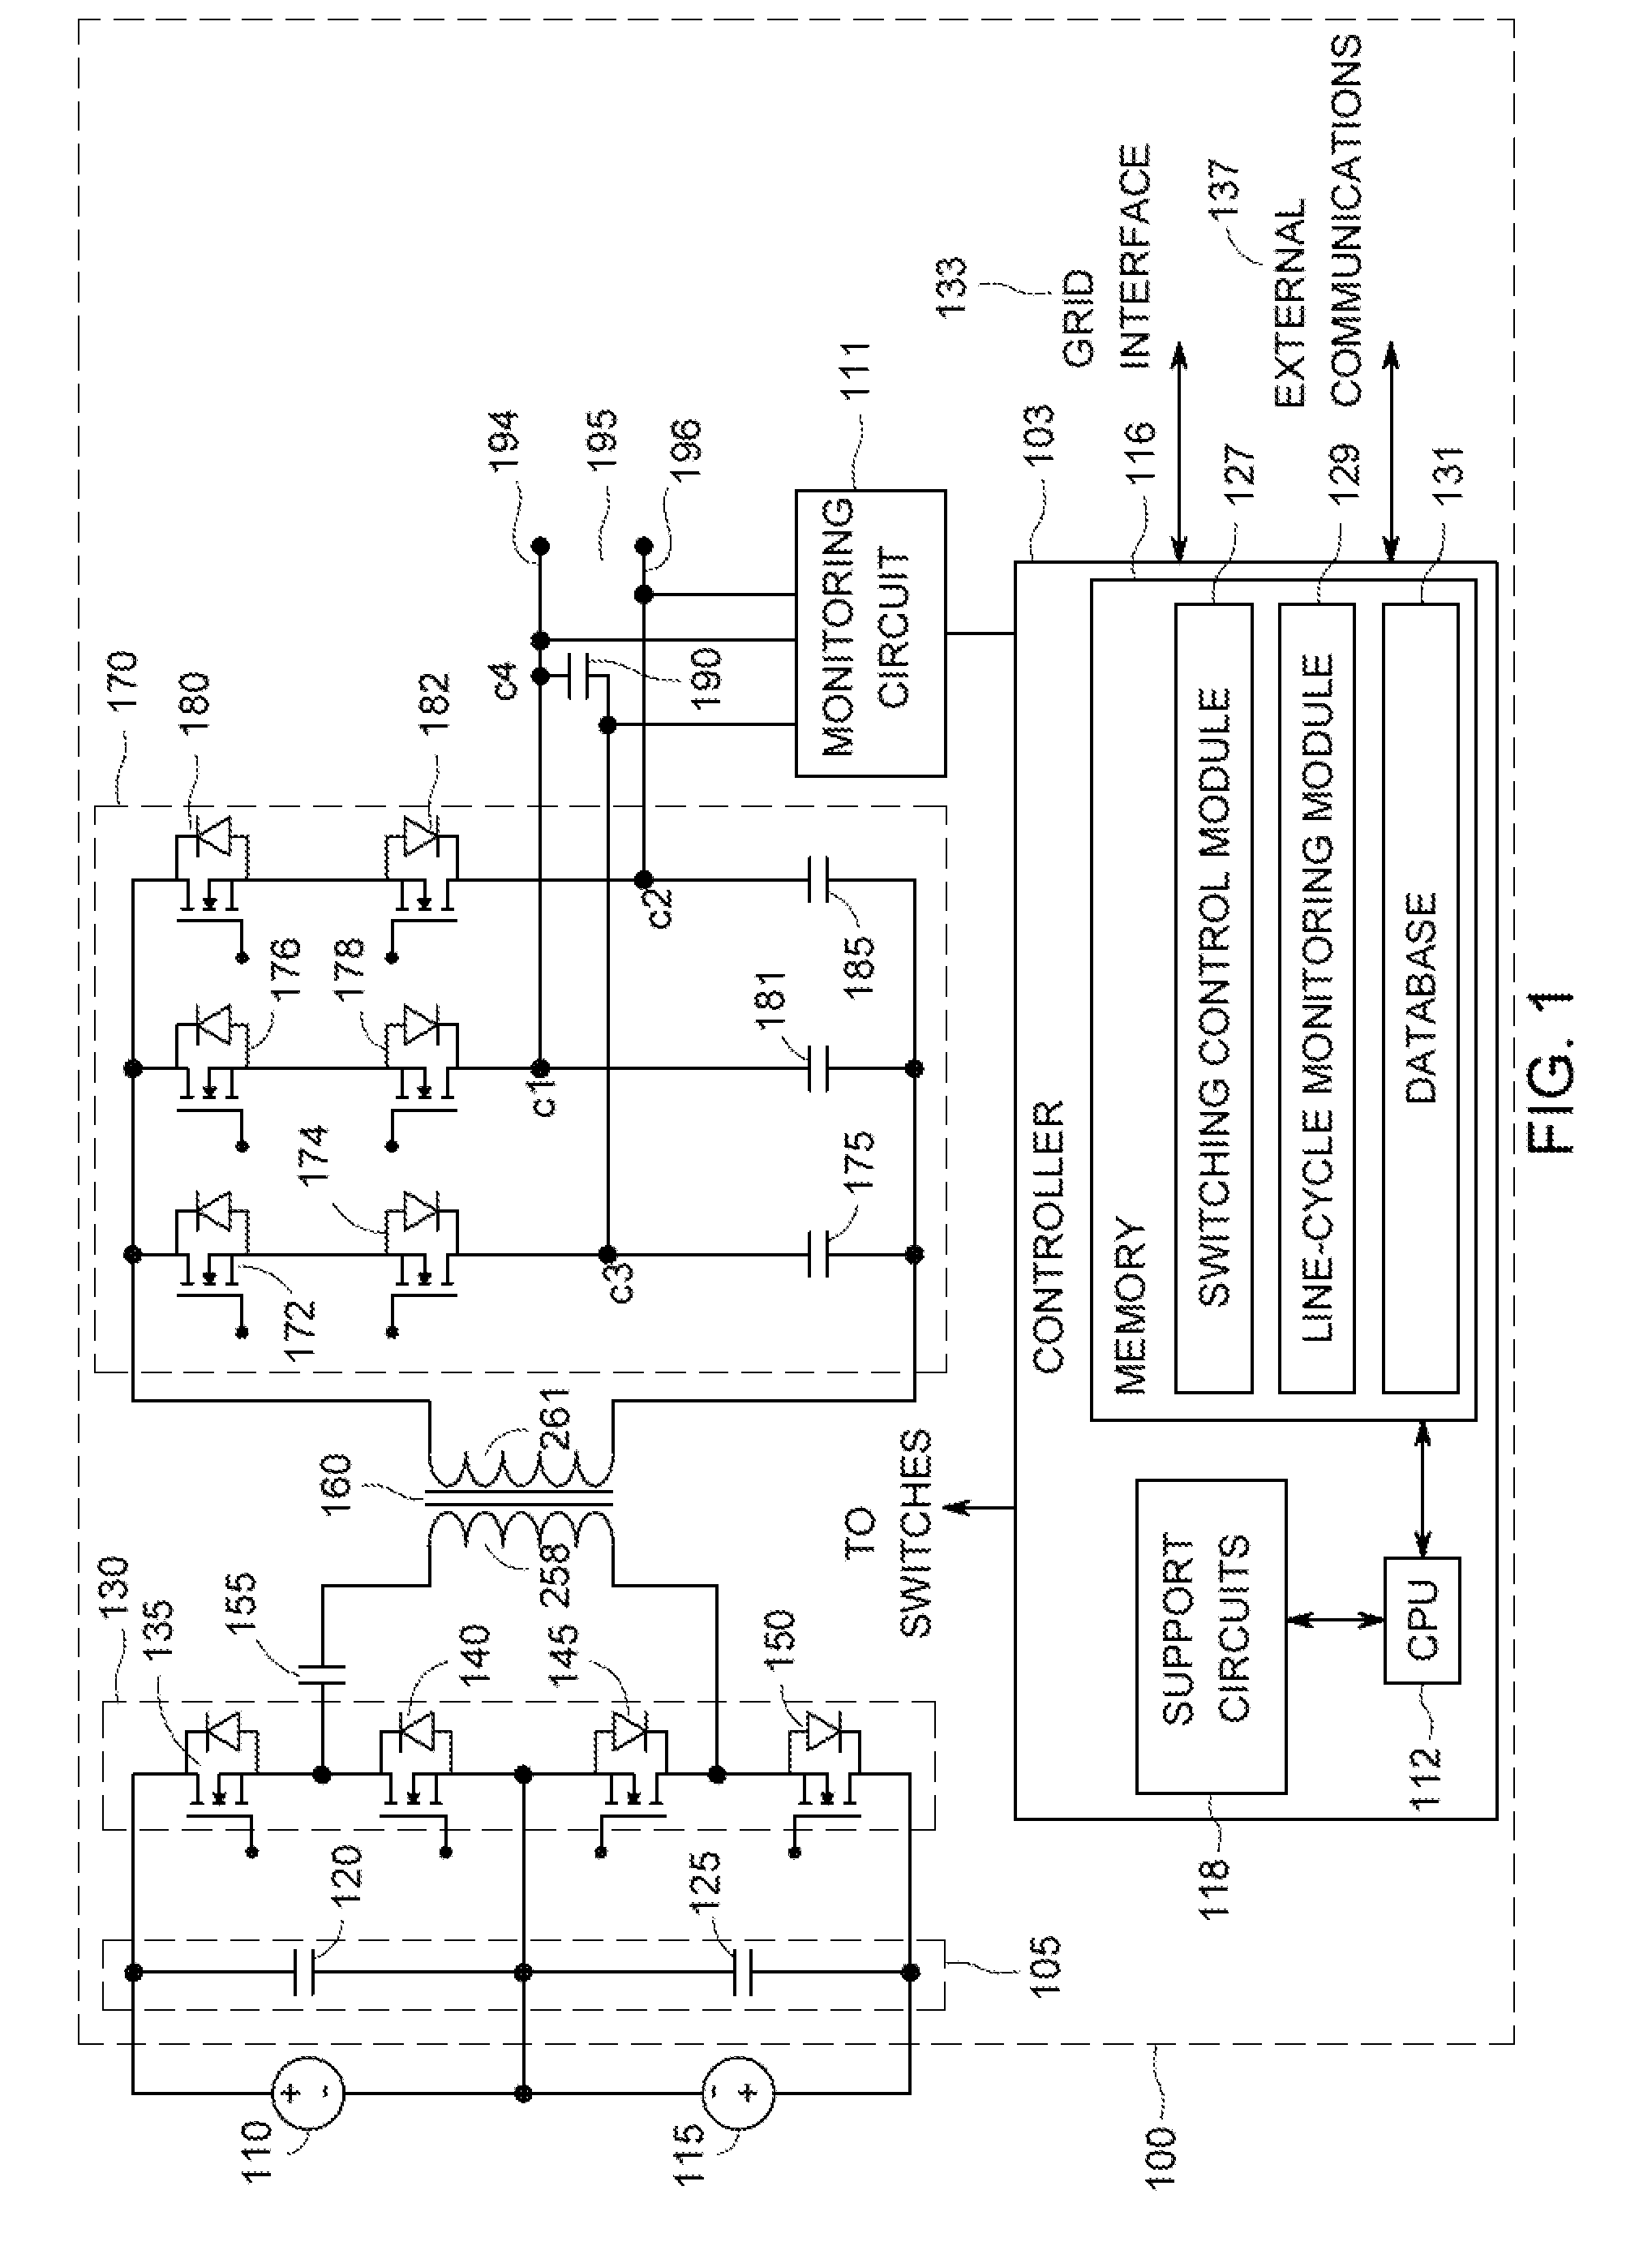 Single-phase cycloconverter with integrated line-cycle energy storage